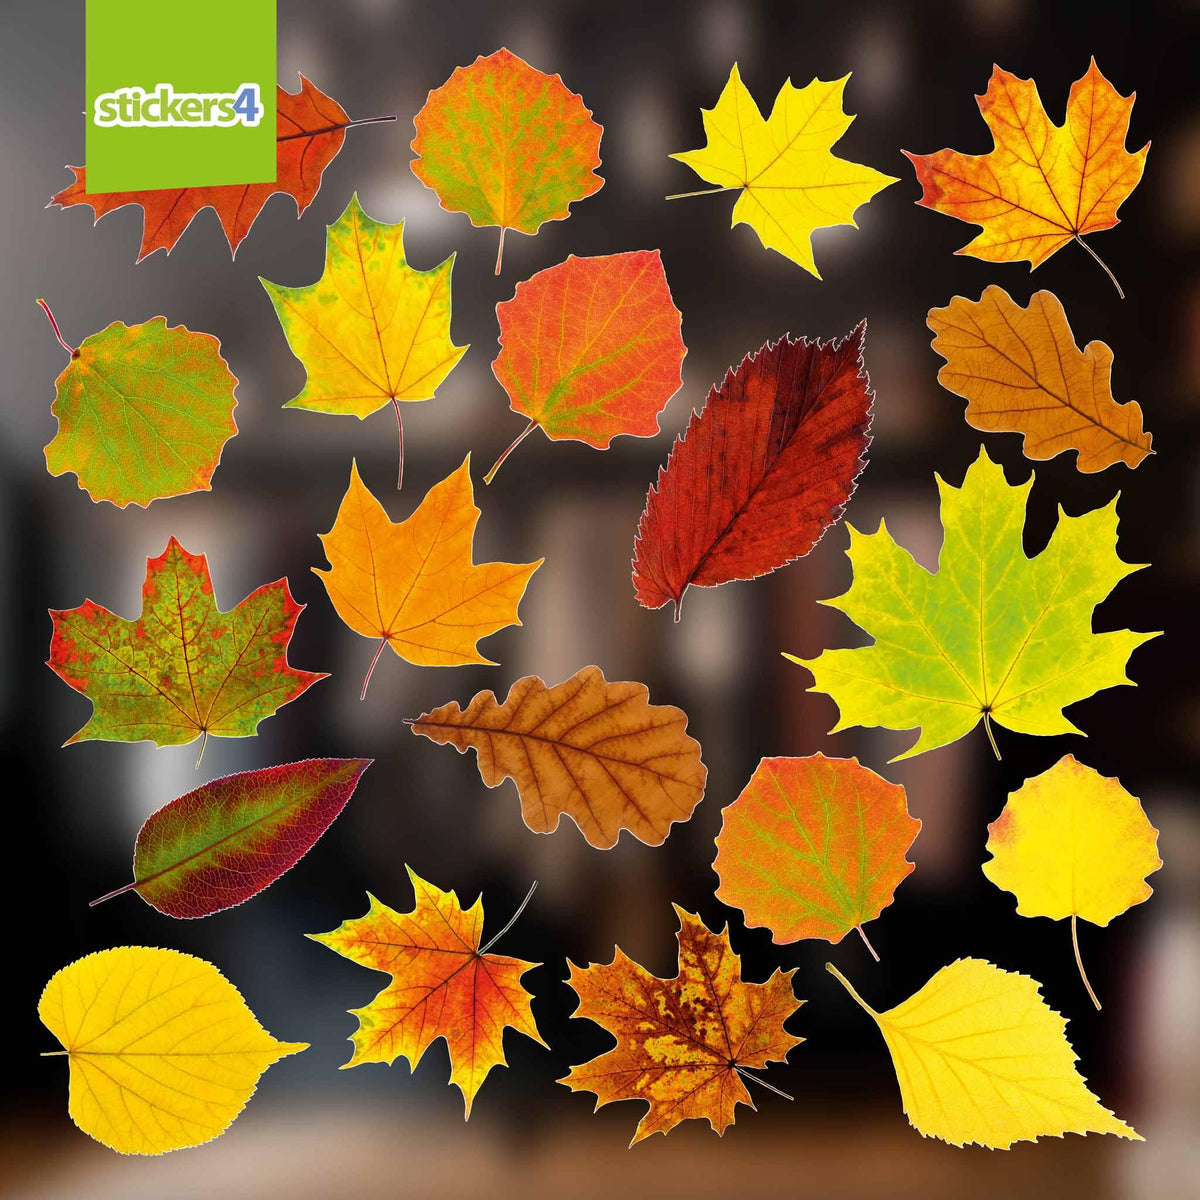 Photorealistic Autumn Leaves Shop Window Stickers - Pack 1 Autumn Window Display